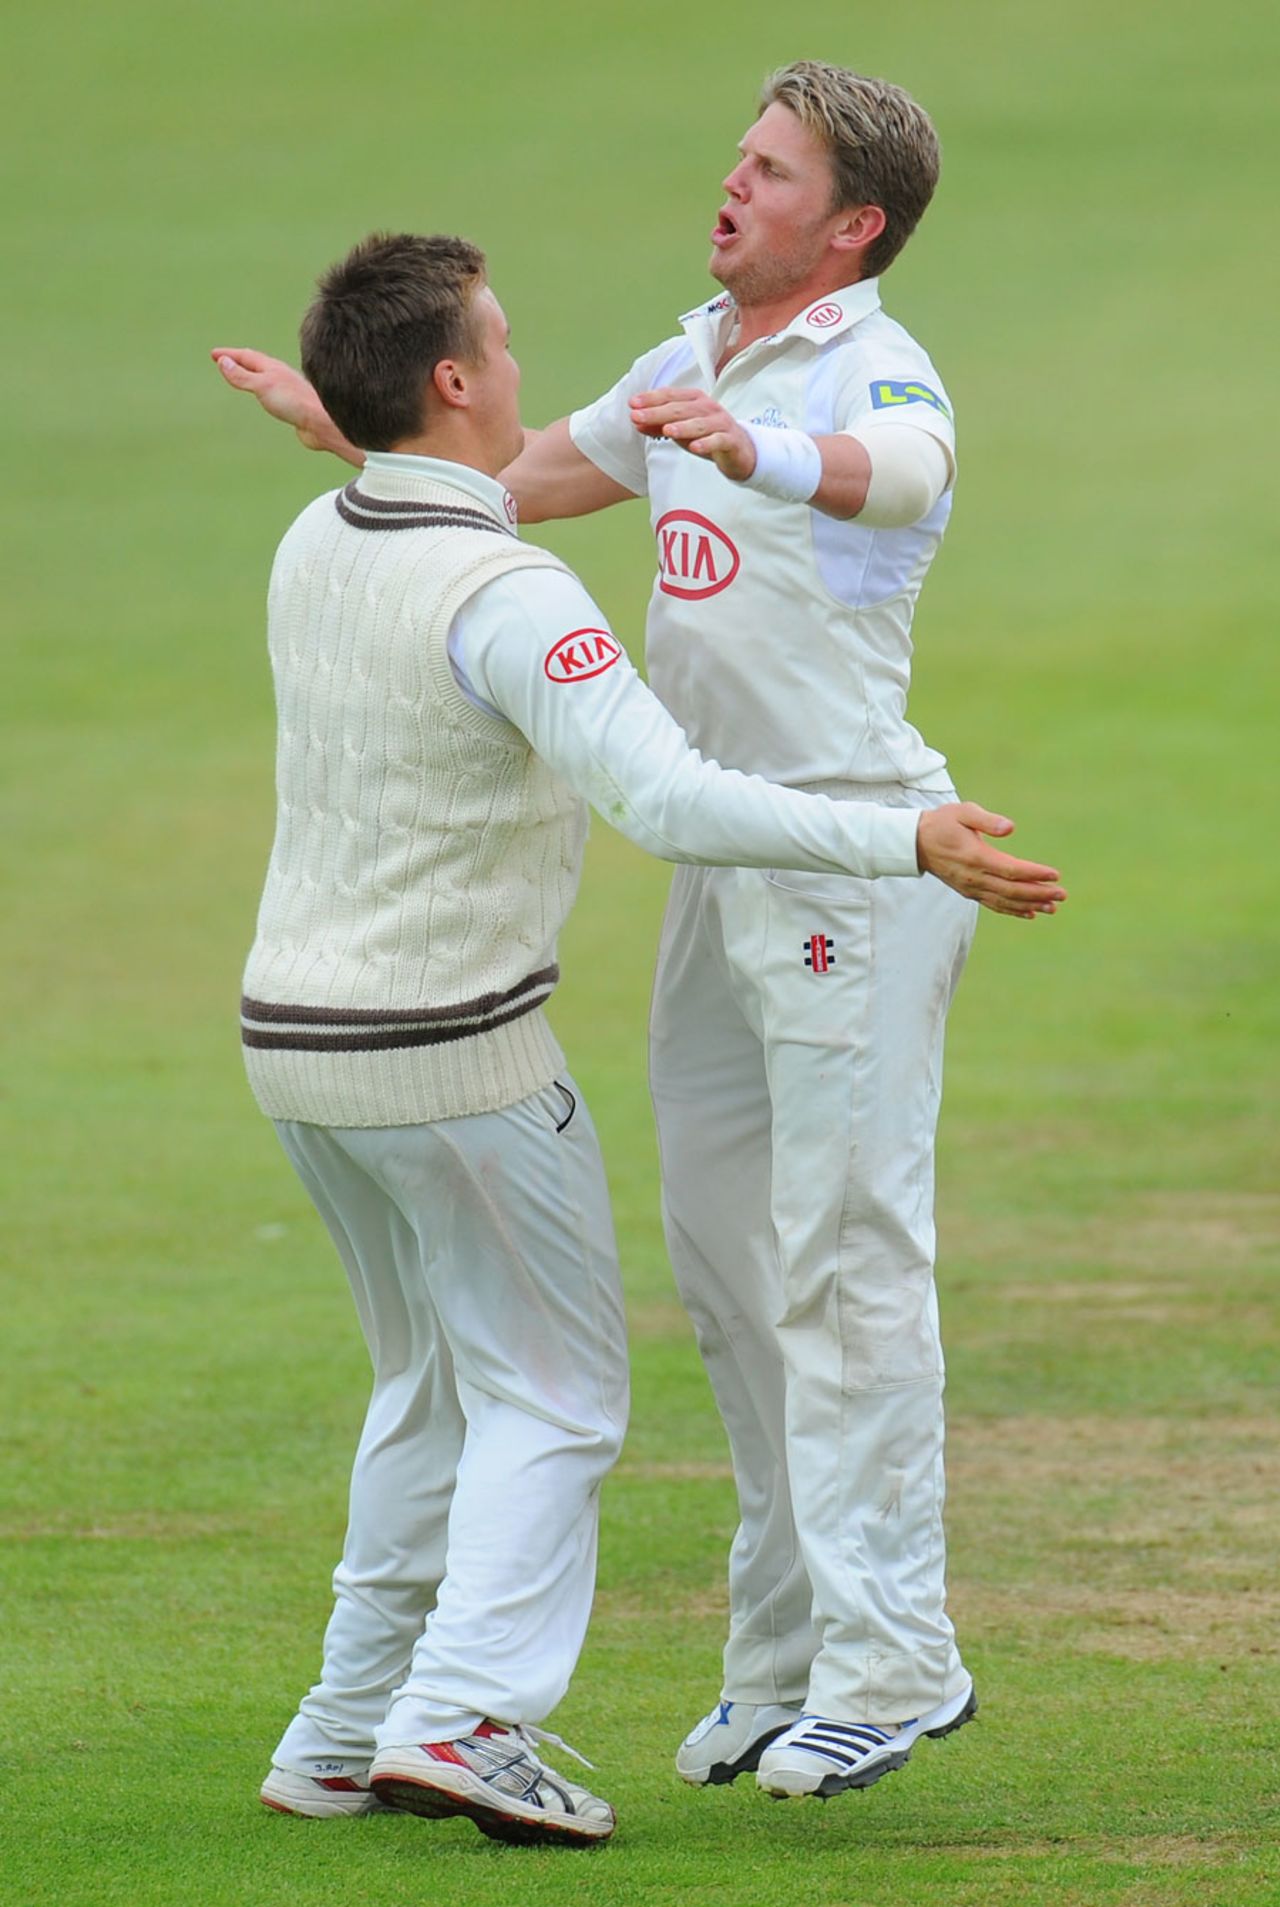 Stuart Meaker celebrates a wicket, Surrey v Somerset, County Championship, Division One, 3rd day, The Oval, May 18, 2012